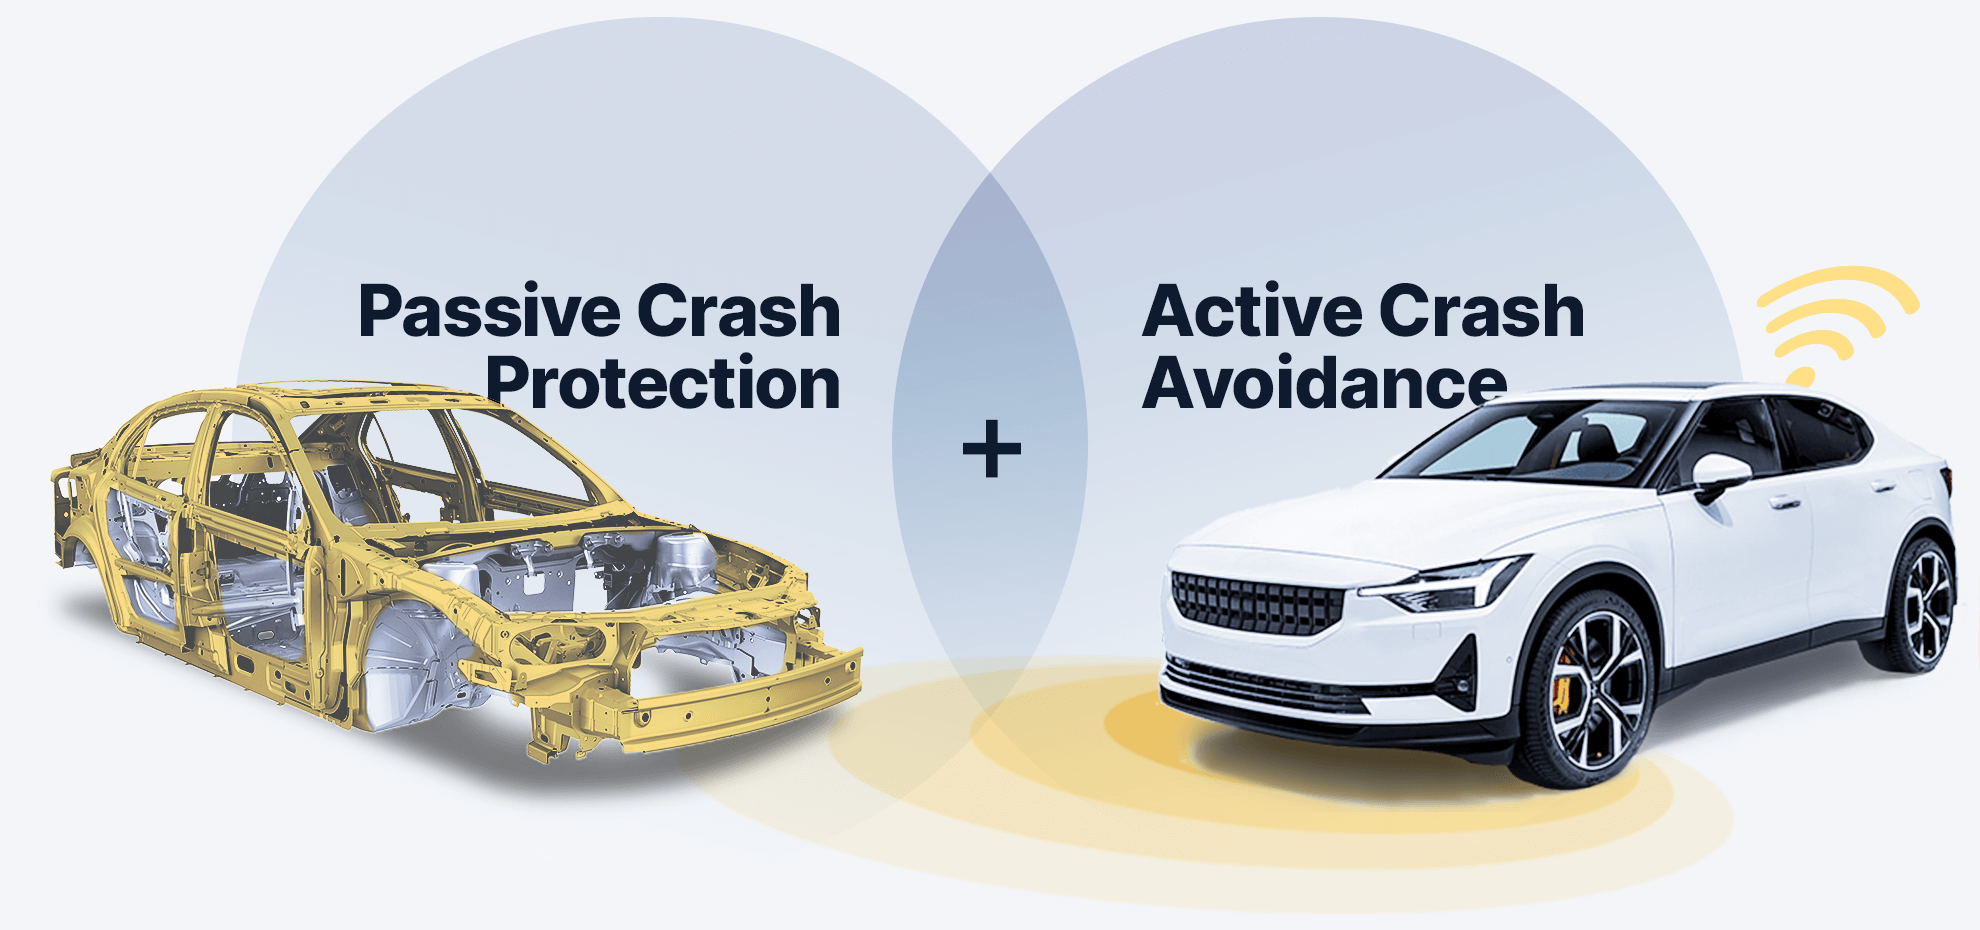 Passive crash protection and active crash avoidance provide the best chance of survival in a crash.